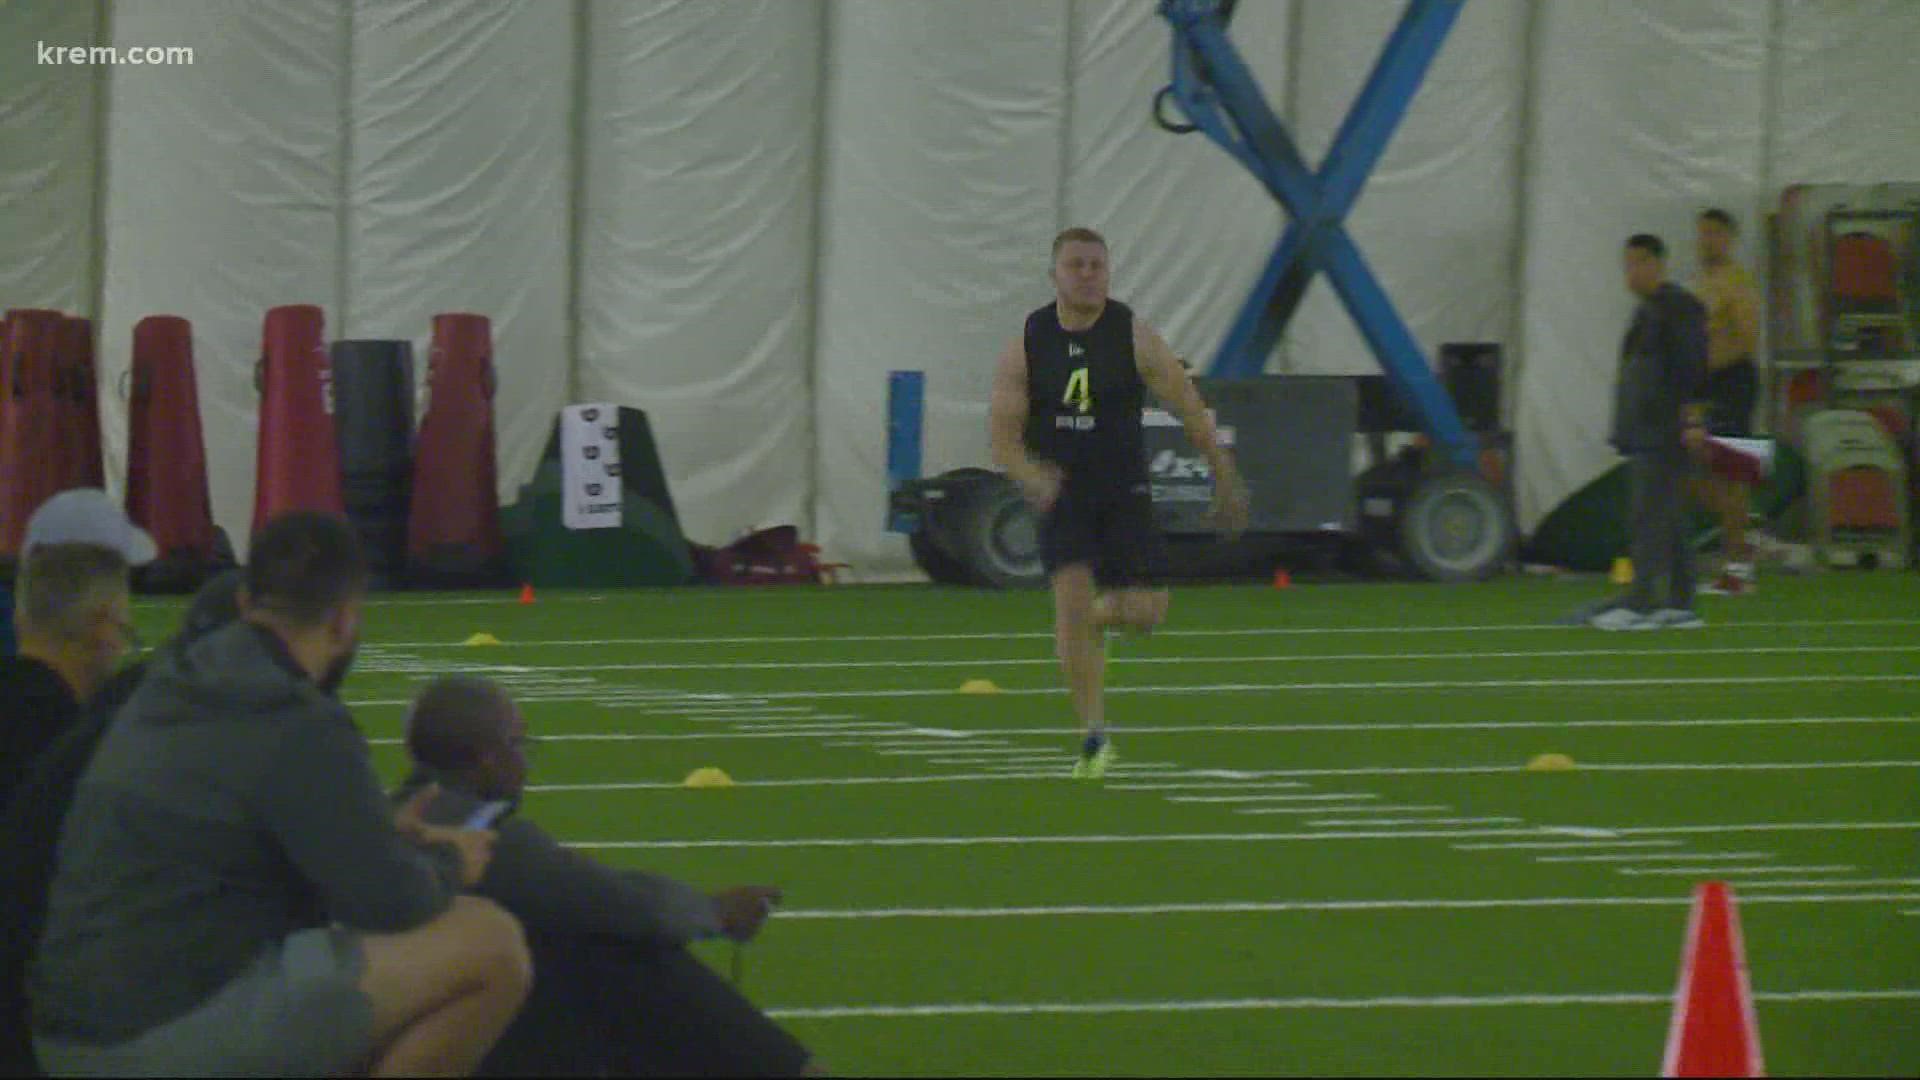 Washington State football held its pro day this morning giving players a final chance to make an impression on NFL scouts.